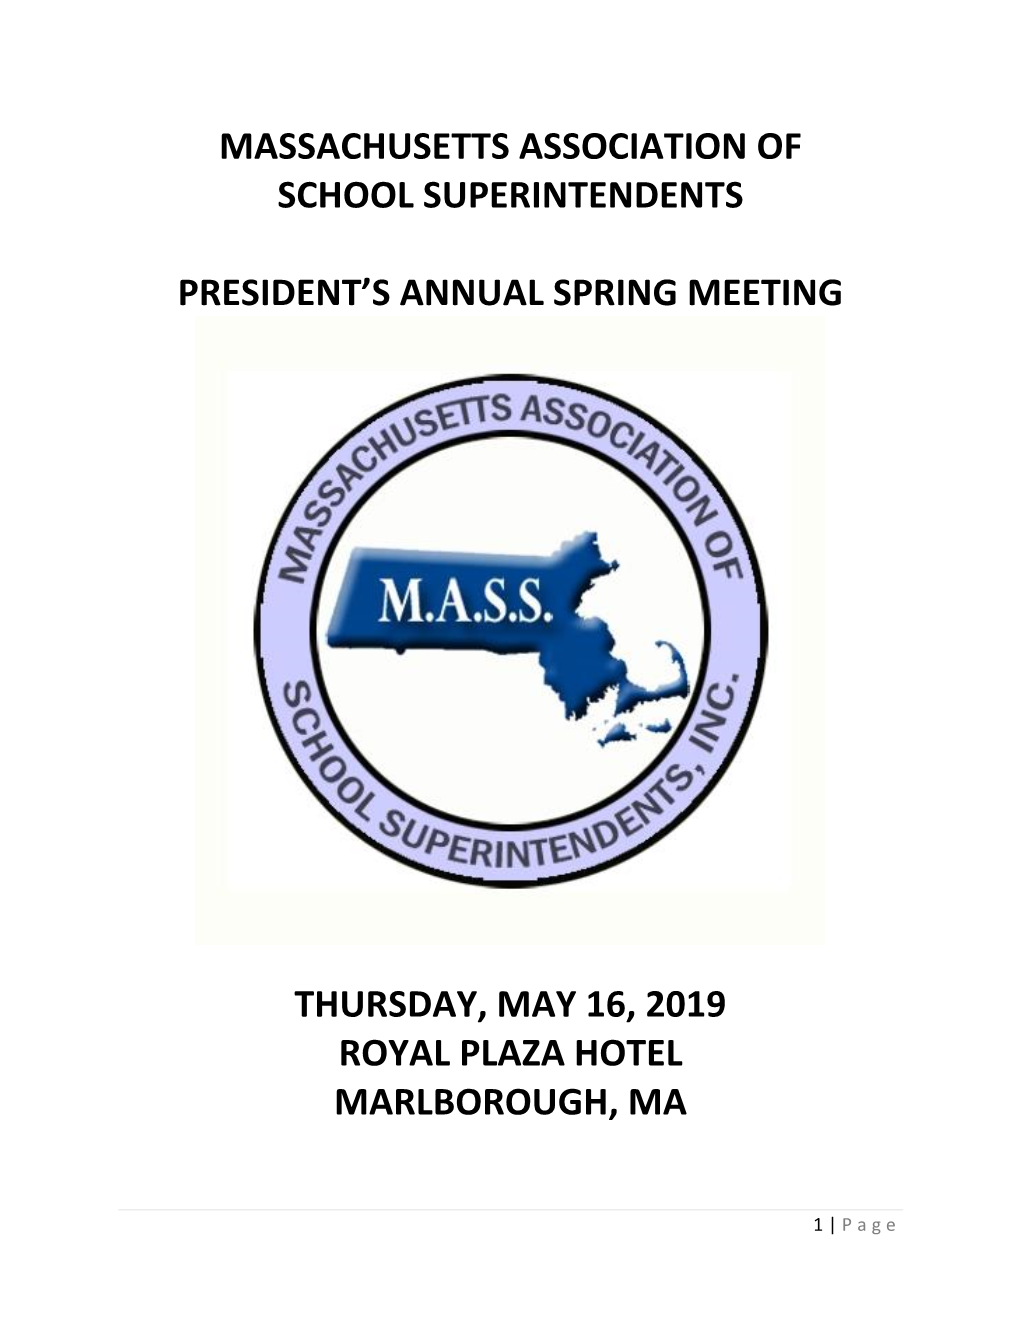 Massachusetts Association of School Superintendents President's Annual Spring Meeting Thursday, May 16, 2019 Royal Plaza Hote